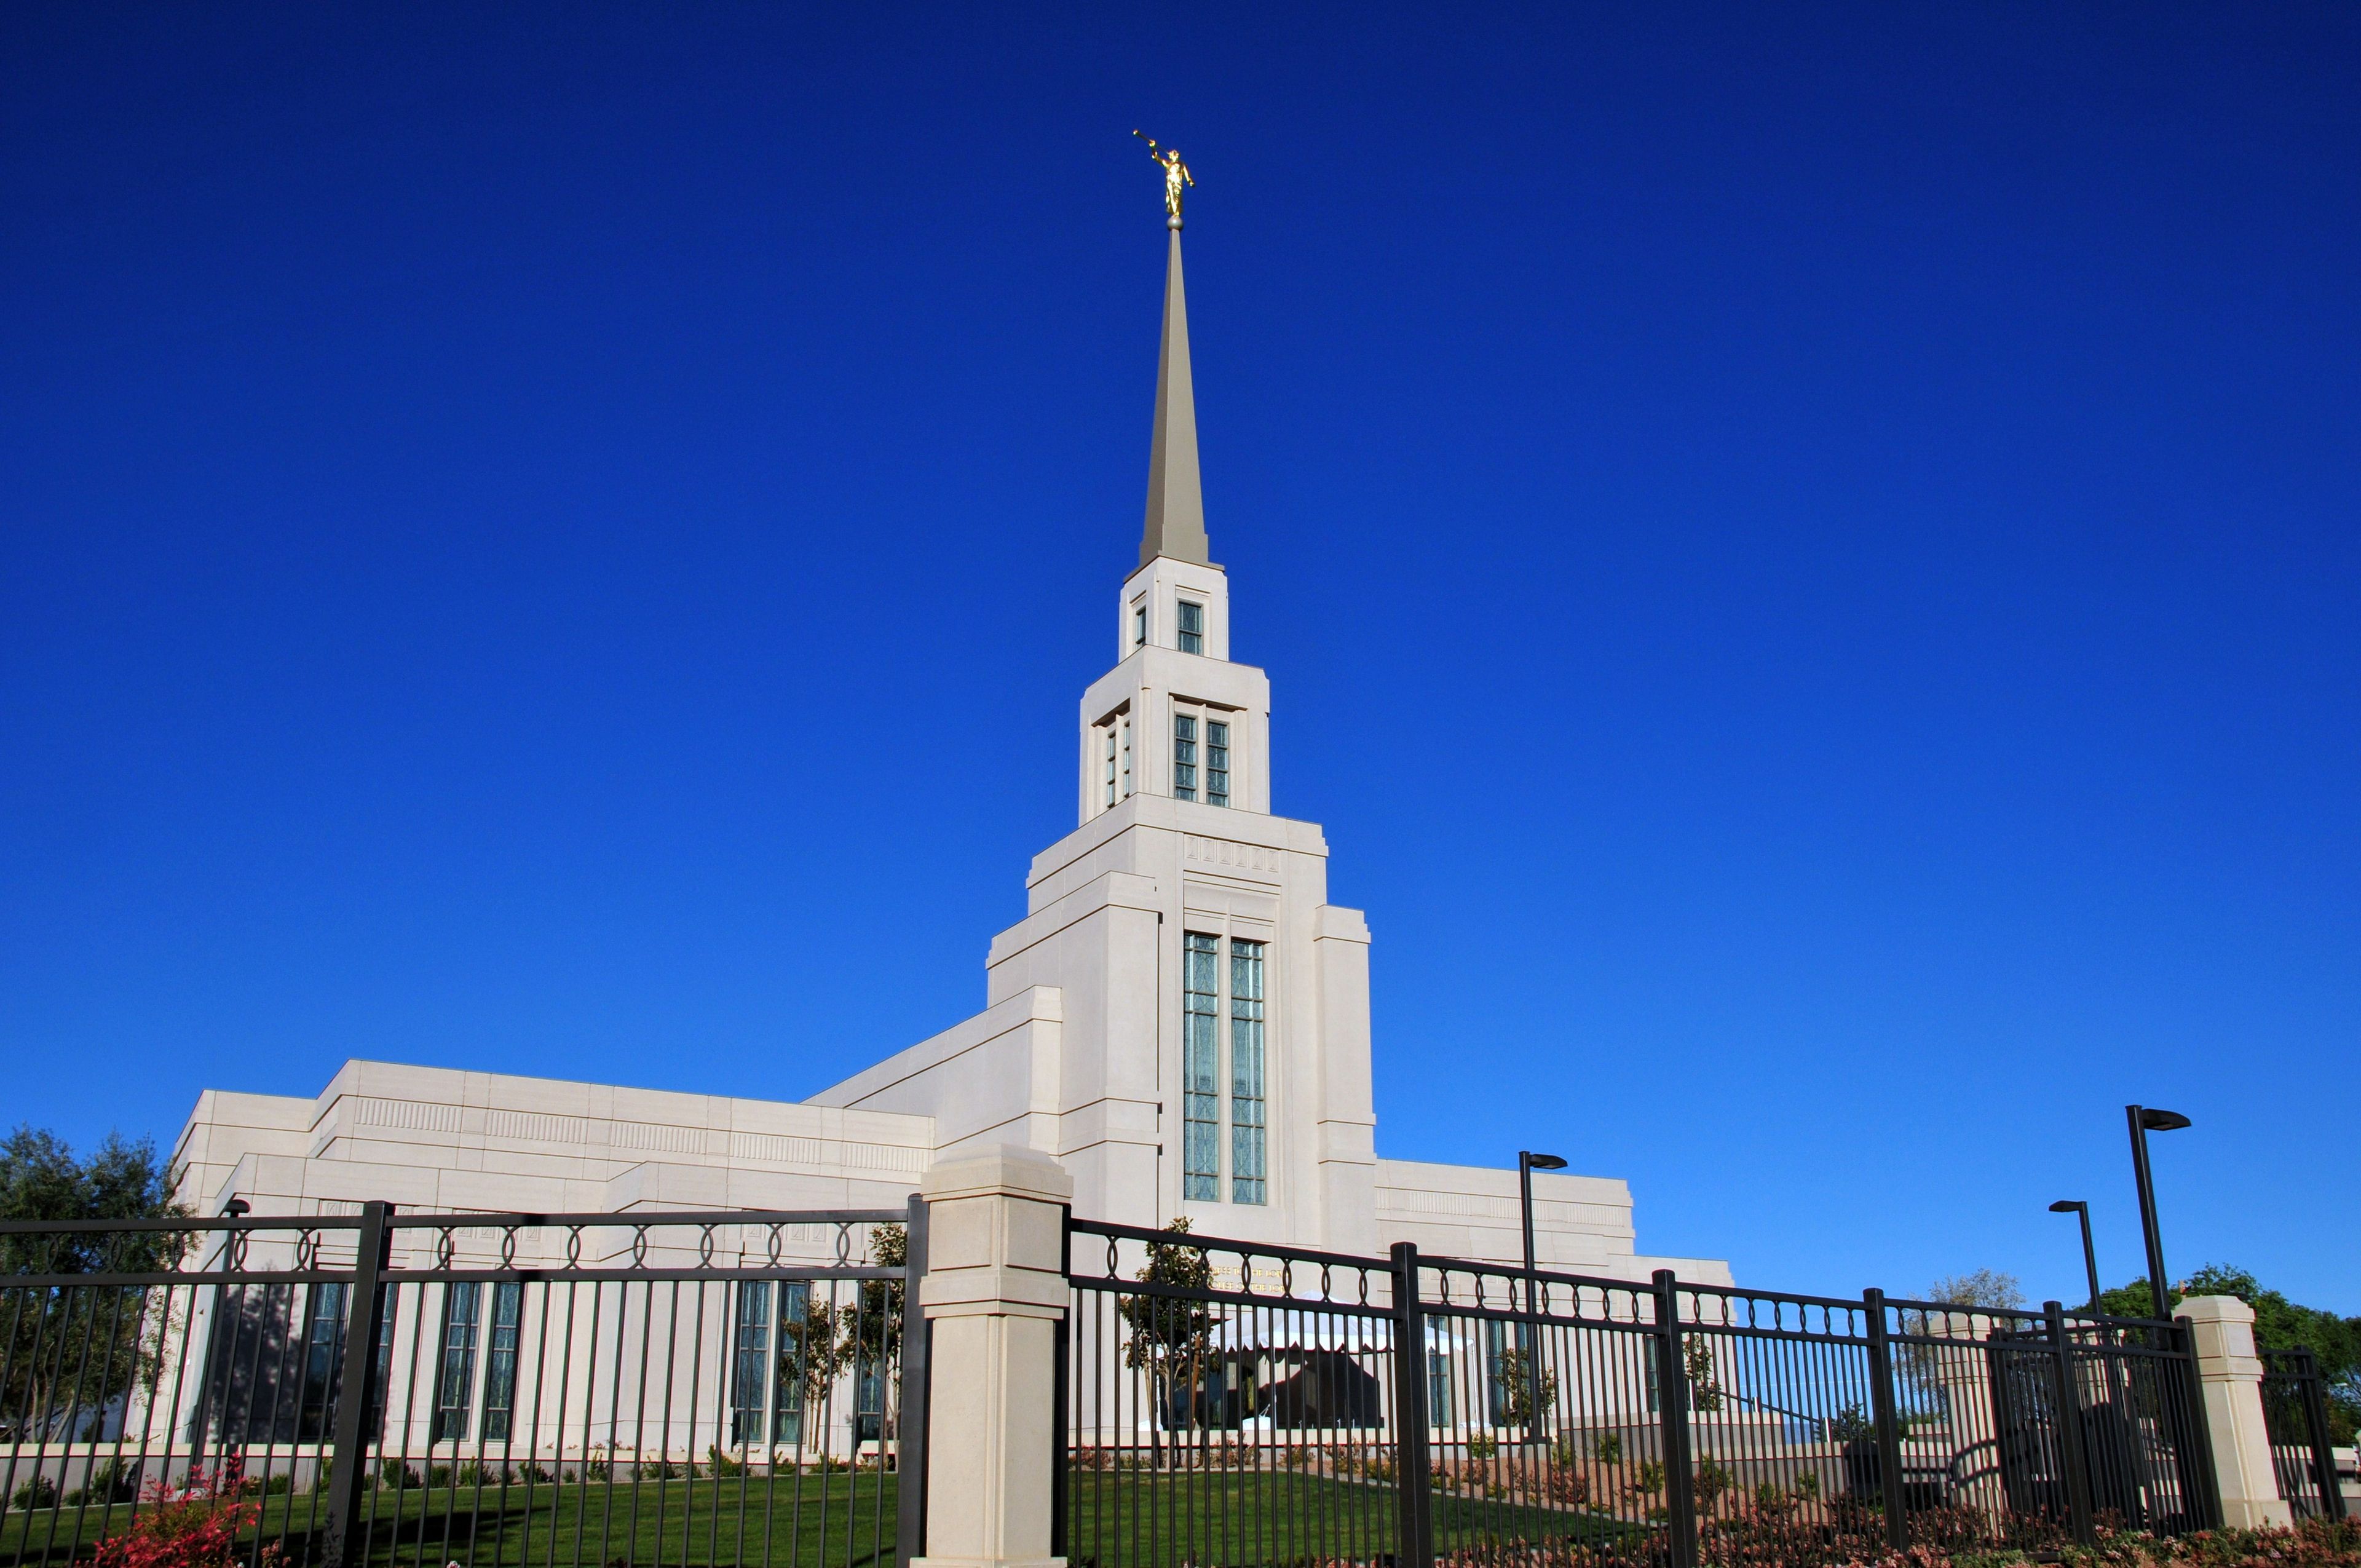 The Gila Valley Arizona Temple, including the entrance and gates.